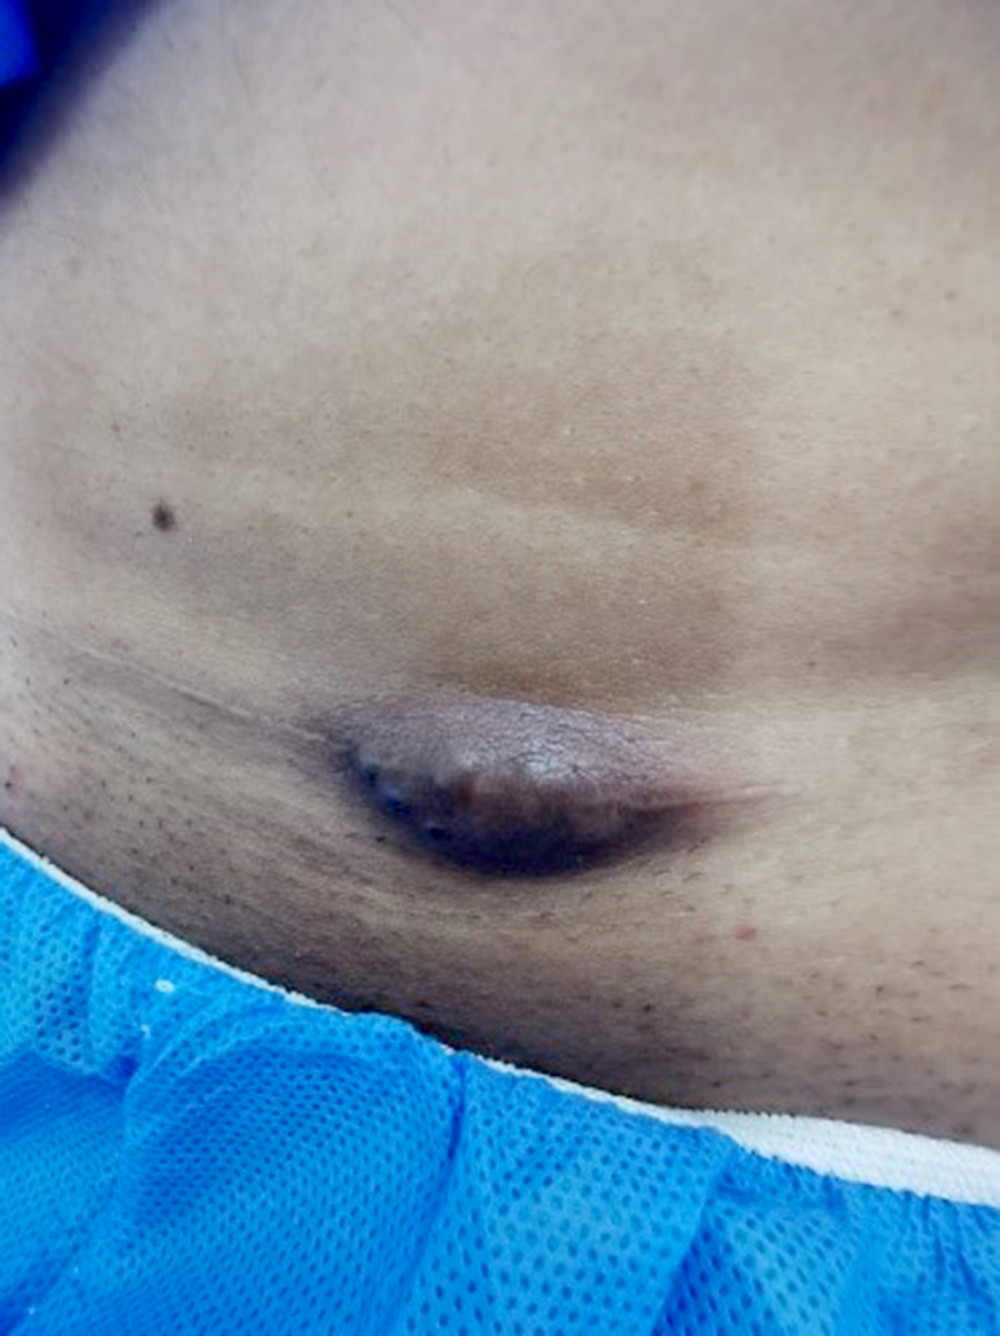 Photograph of the left corner of the cesarean section scar showing a bulging, hyperpigmented mass.